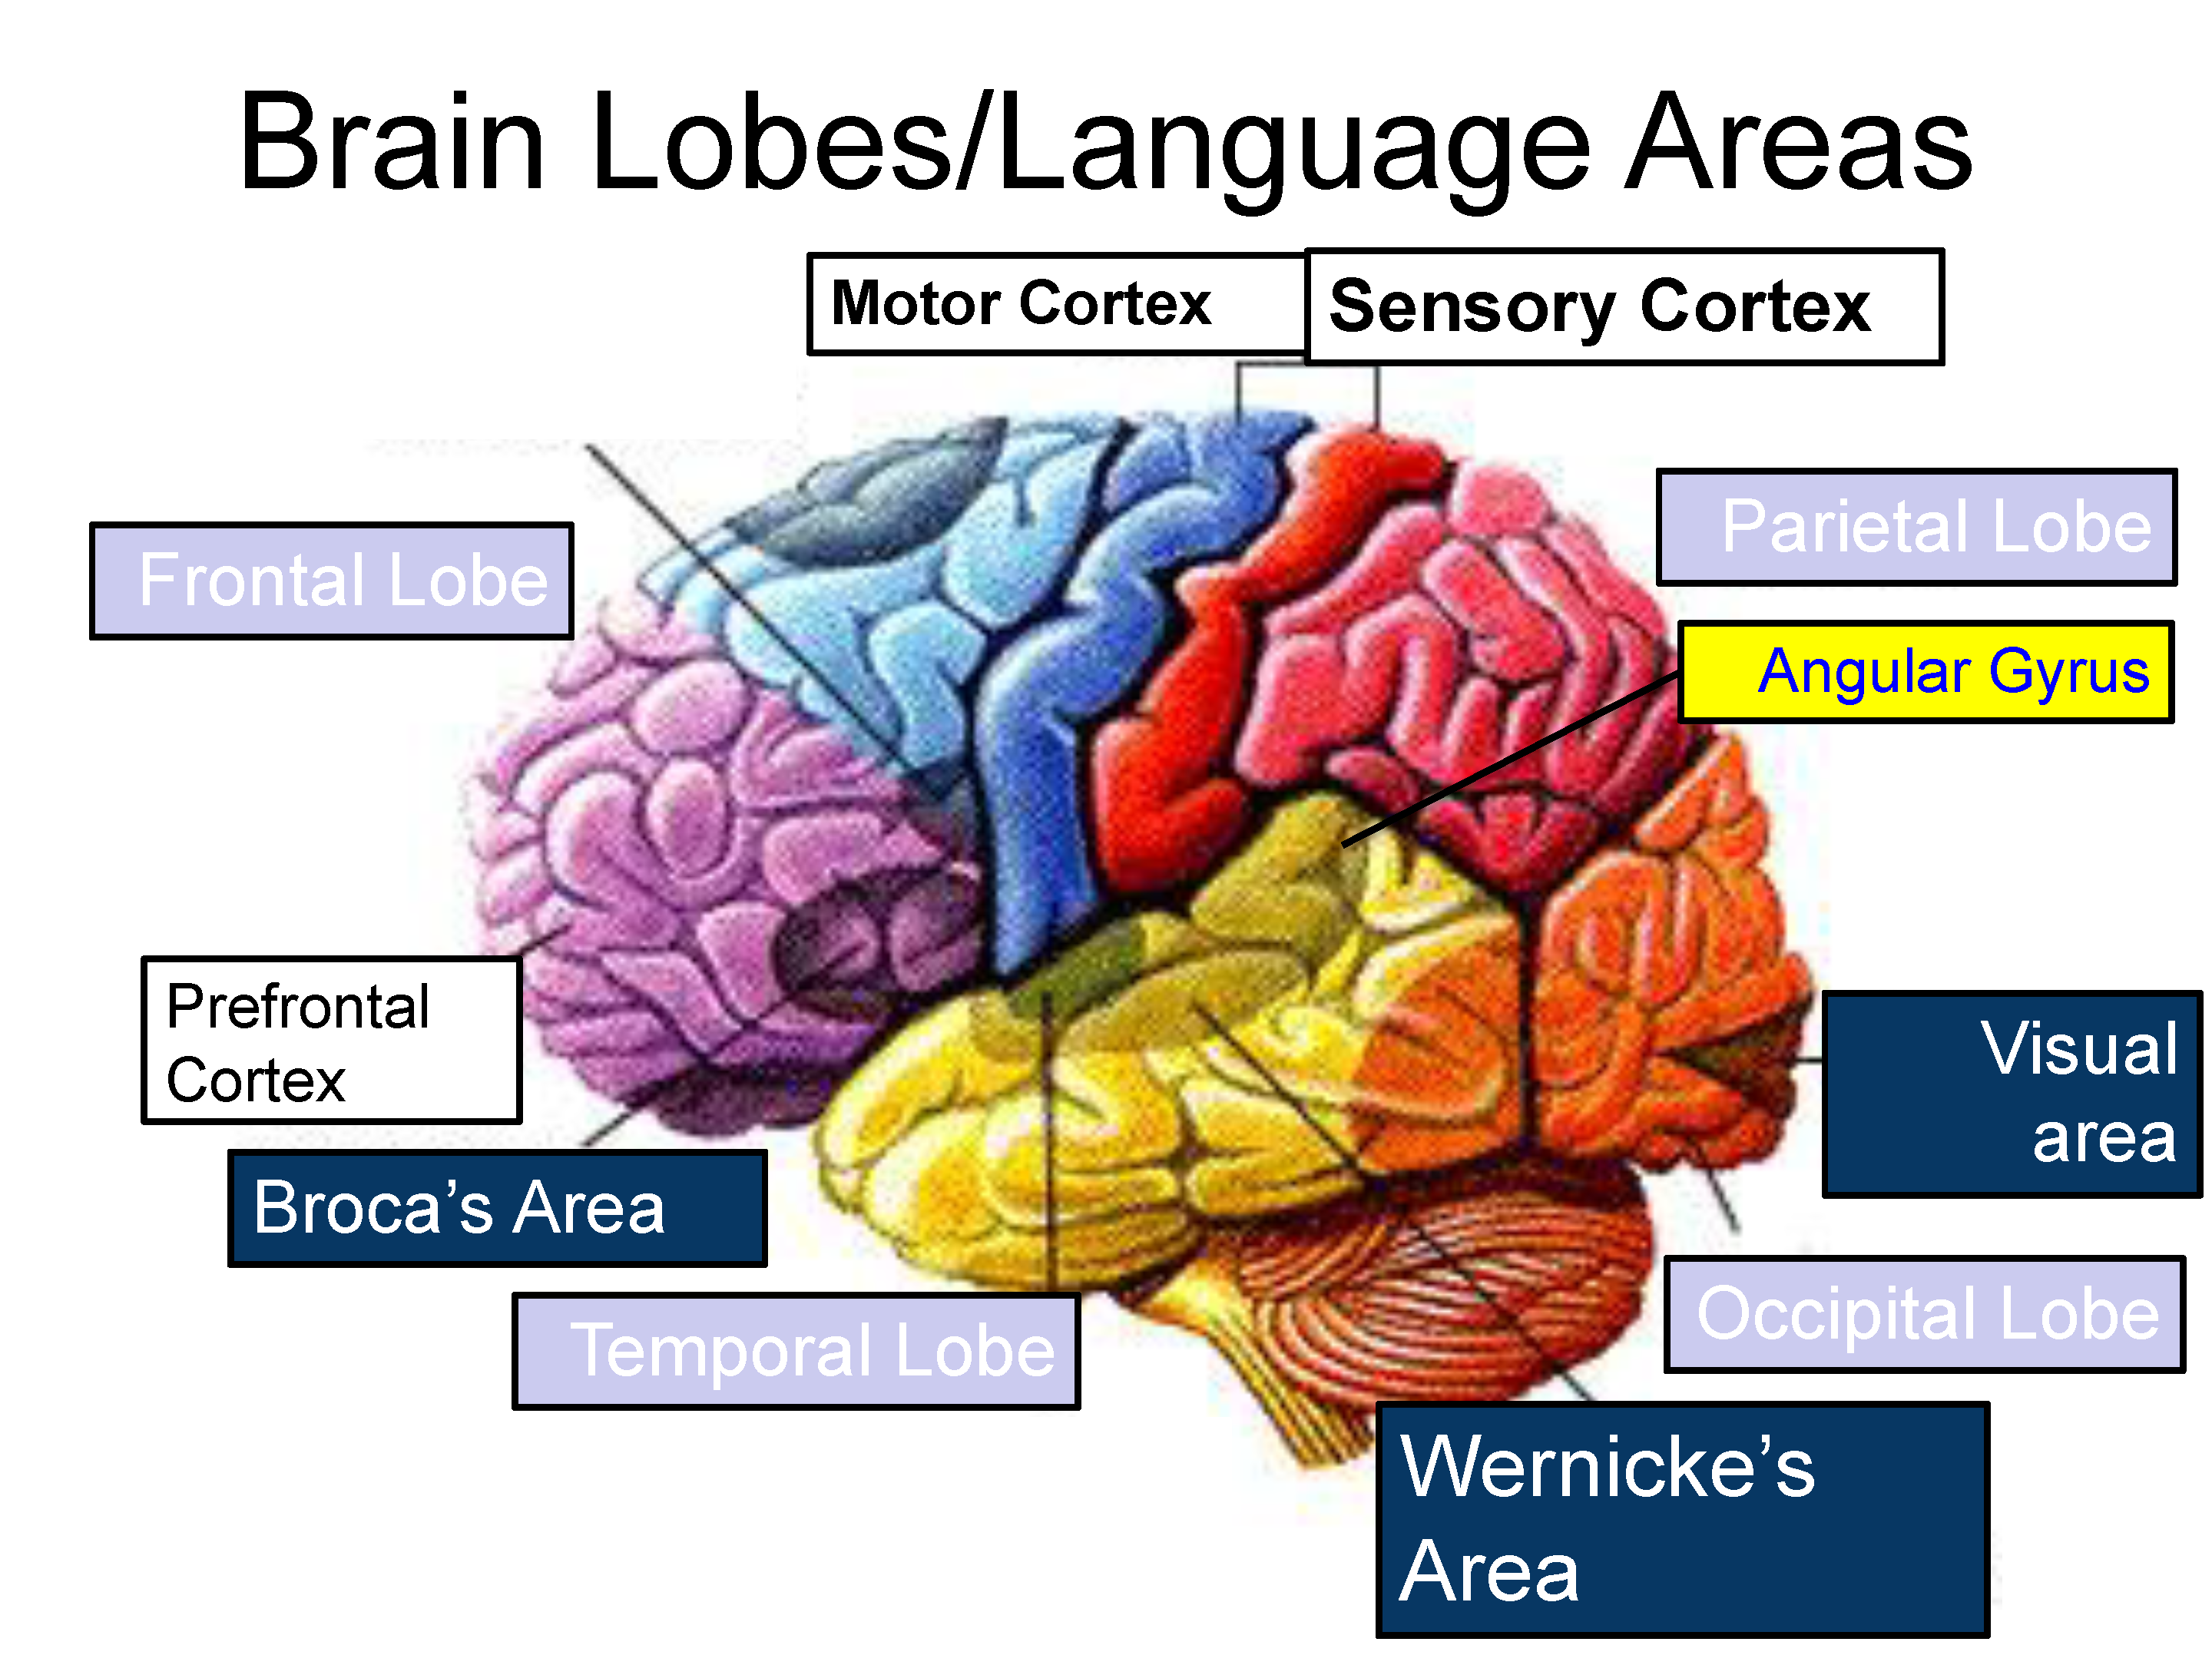 <p>an area at the rear of the frontal lobes that controls voluntary movements</p>